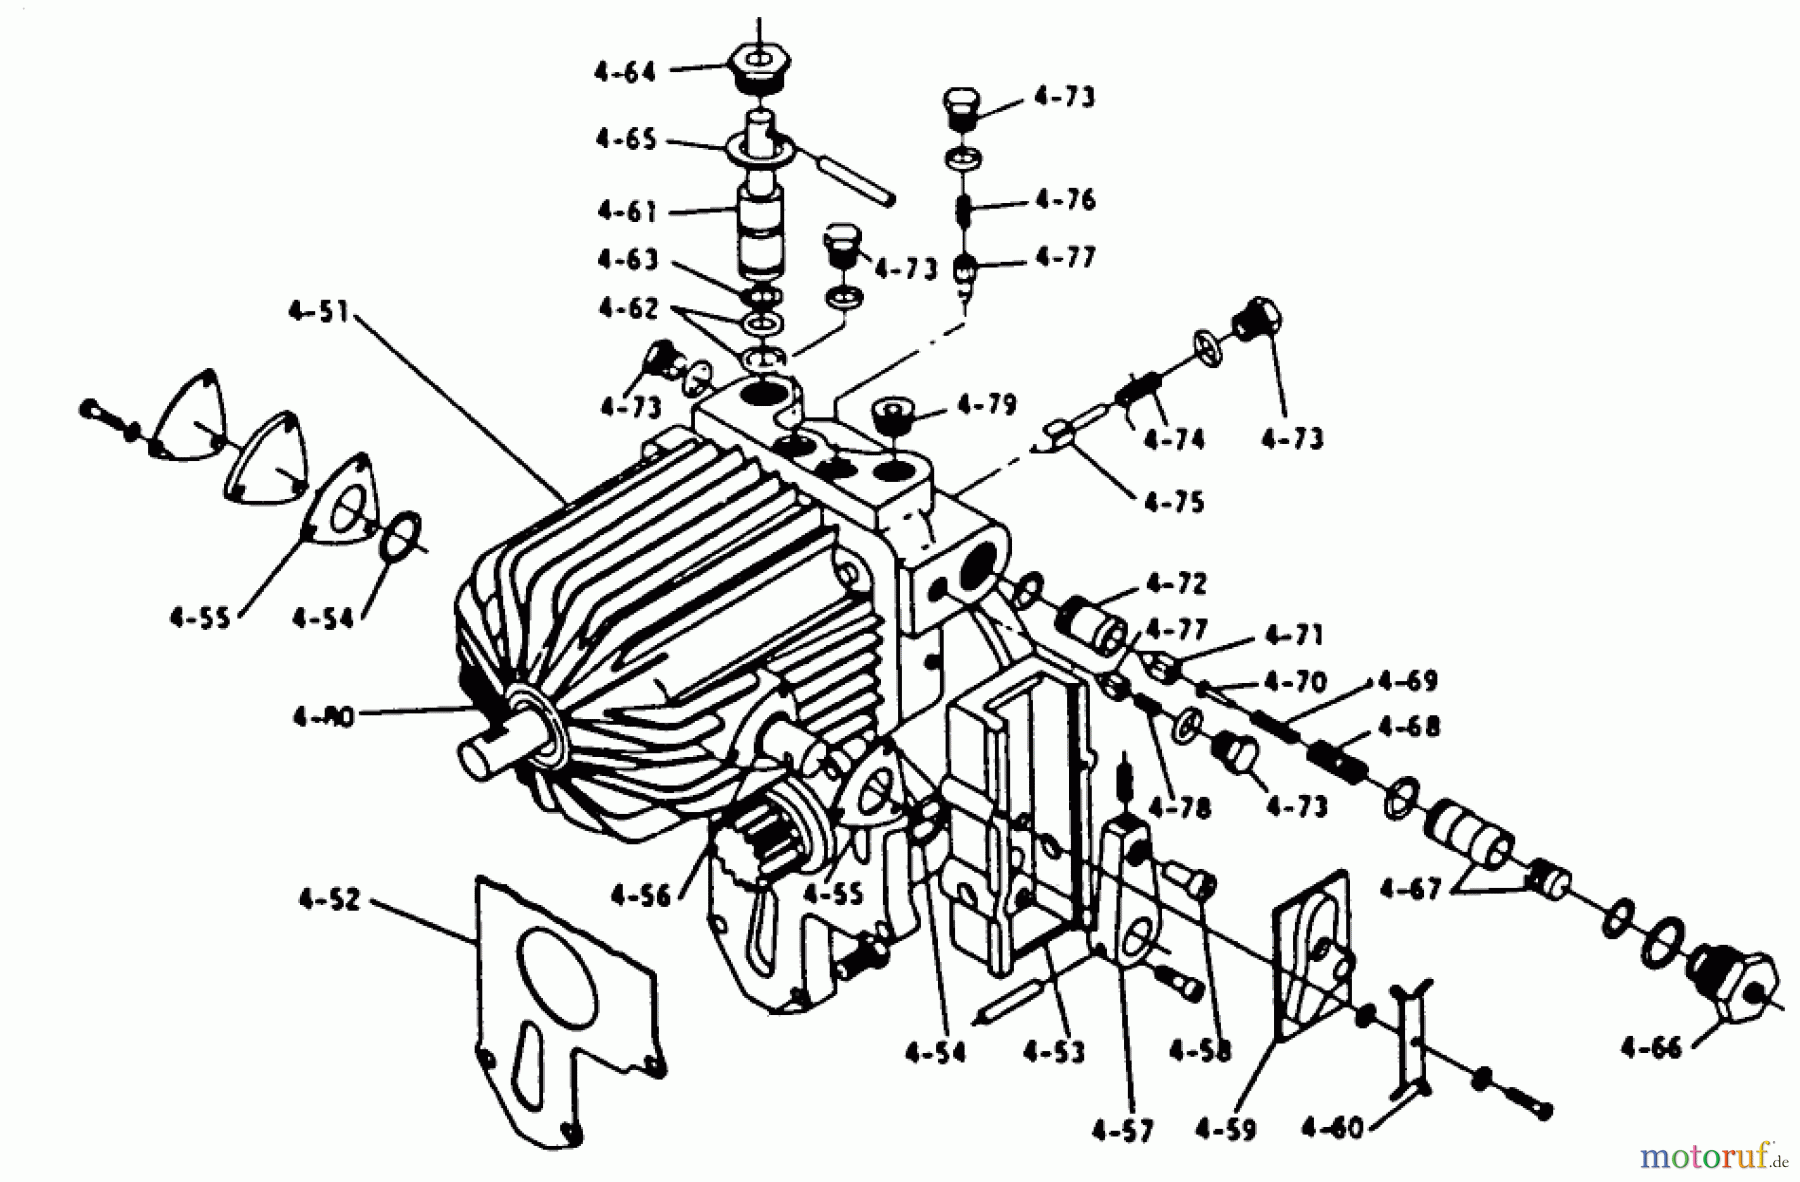  Toro Neu Mowers, Lawn & Garden Tractor Seite 1 1-0460 - Toro 12 hp Automatic Tractor, 1973 PARTS LIST FOR 4.050 HYDROGEAR (PLATE 4.4)